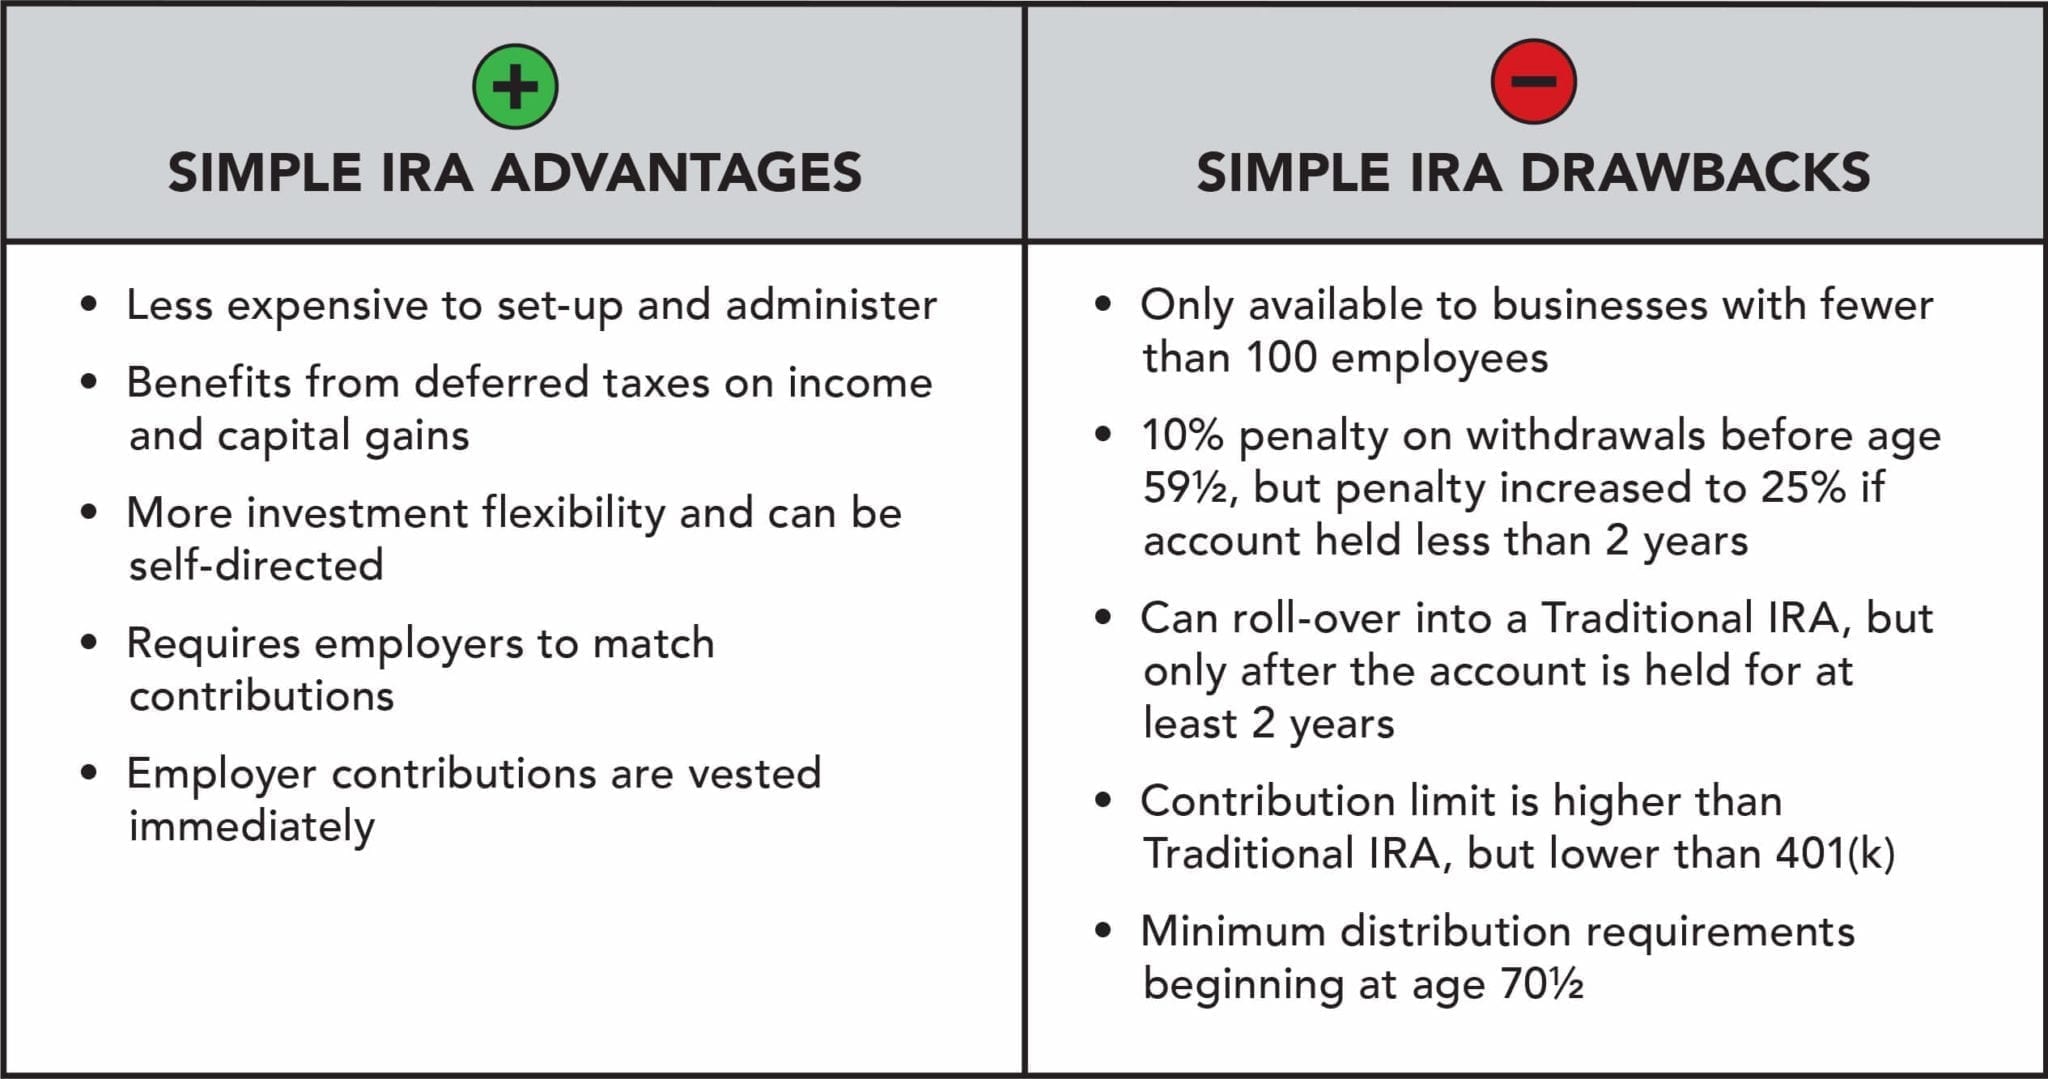 The SIMPLE IRA is similar to the 401(k) but has some specific advantages and drawbacks.